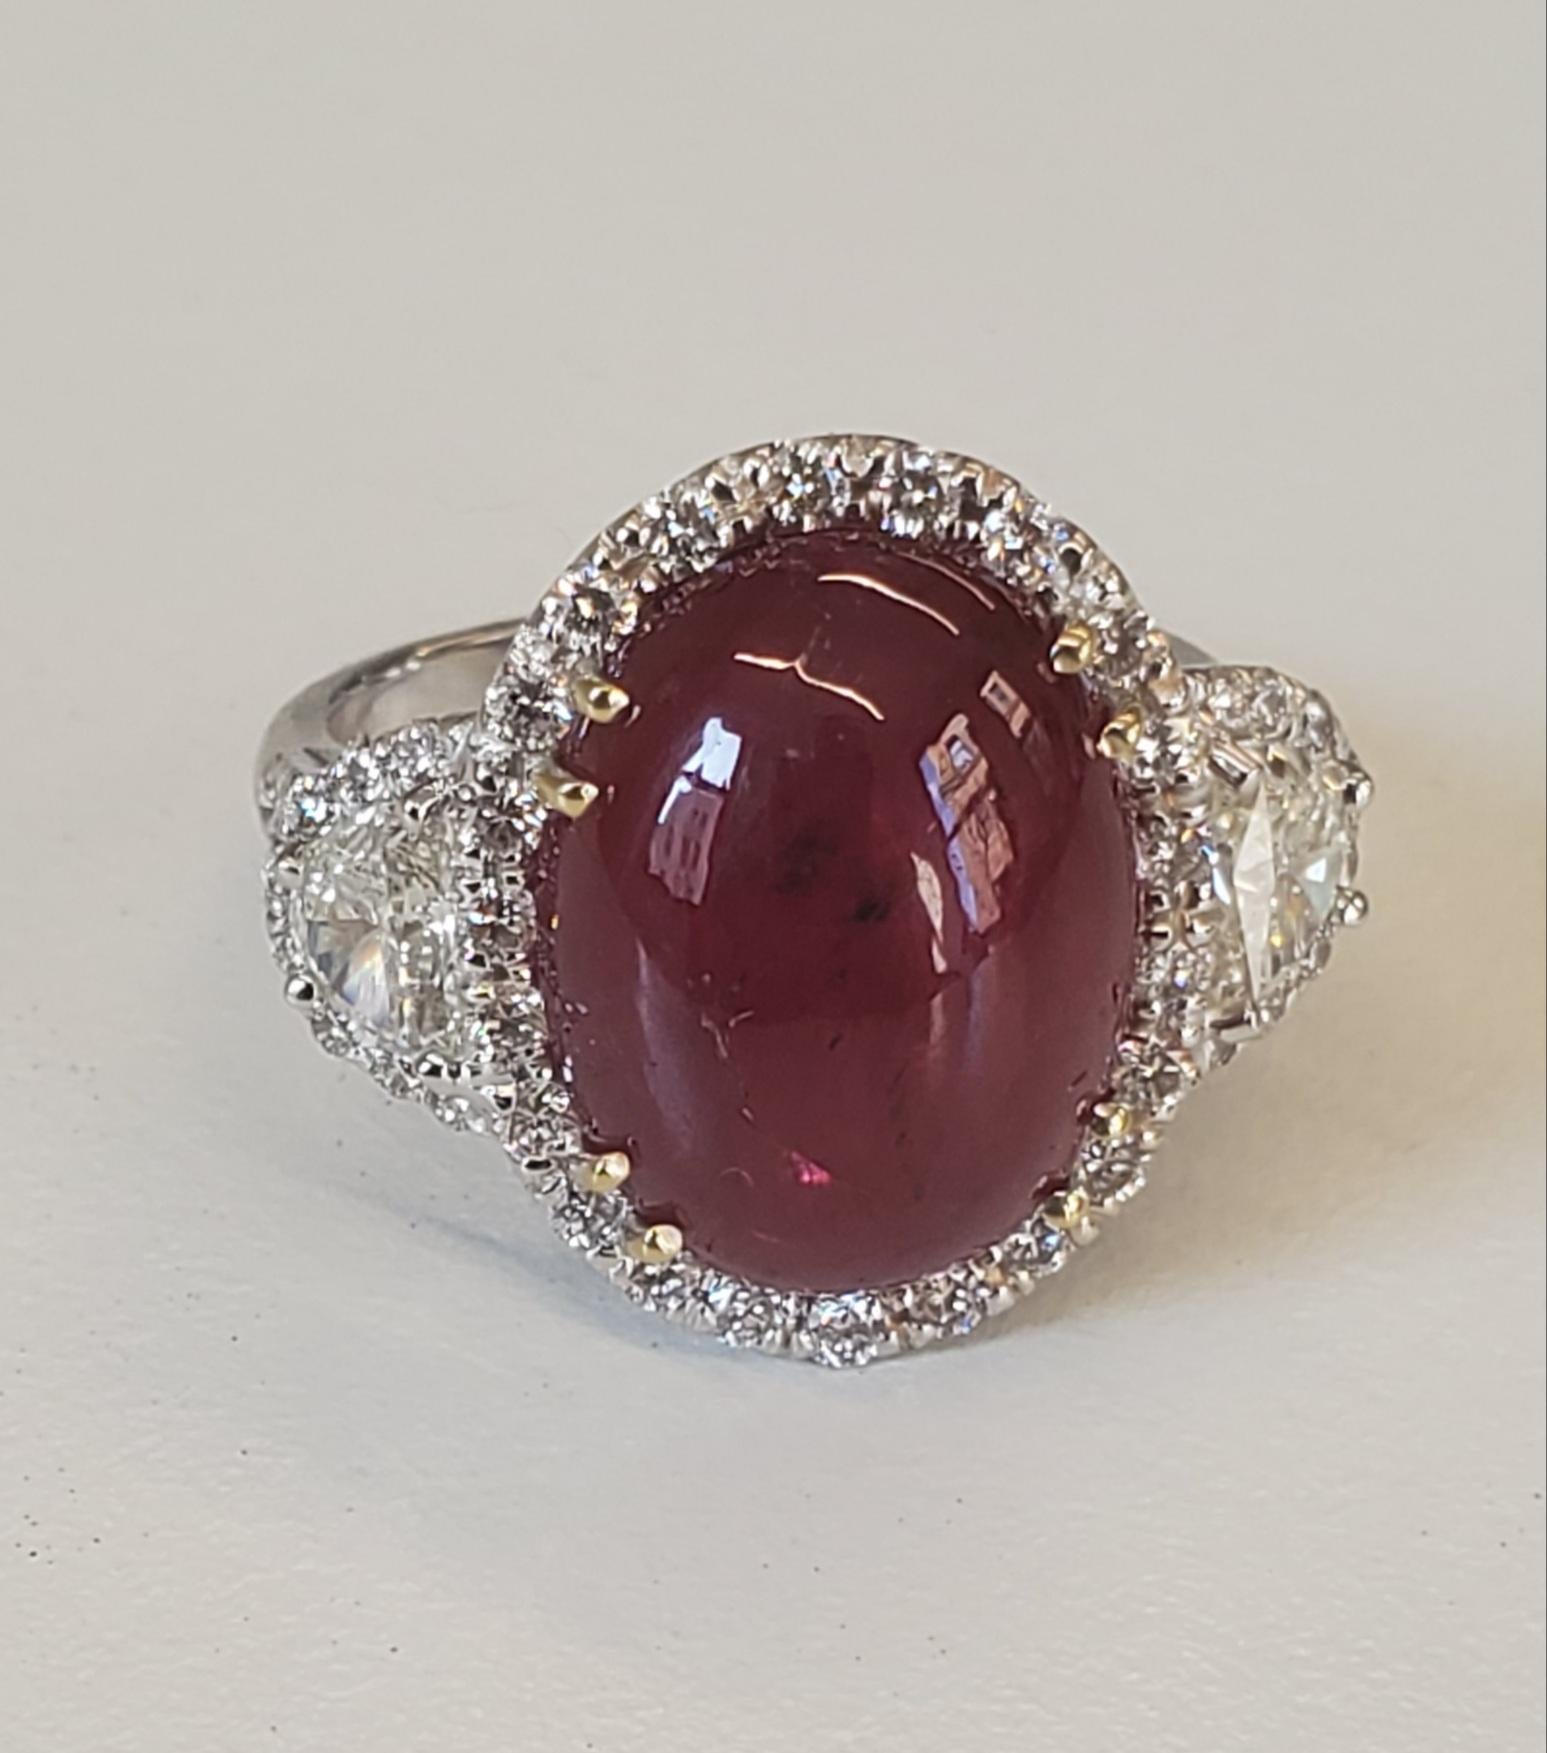 Contemporary 11.48 Carat Cabochon Oval Ruby & Diamond Ring in 18k White Gold